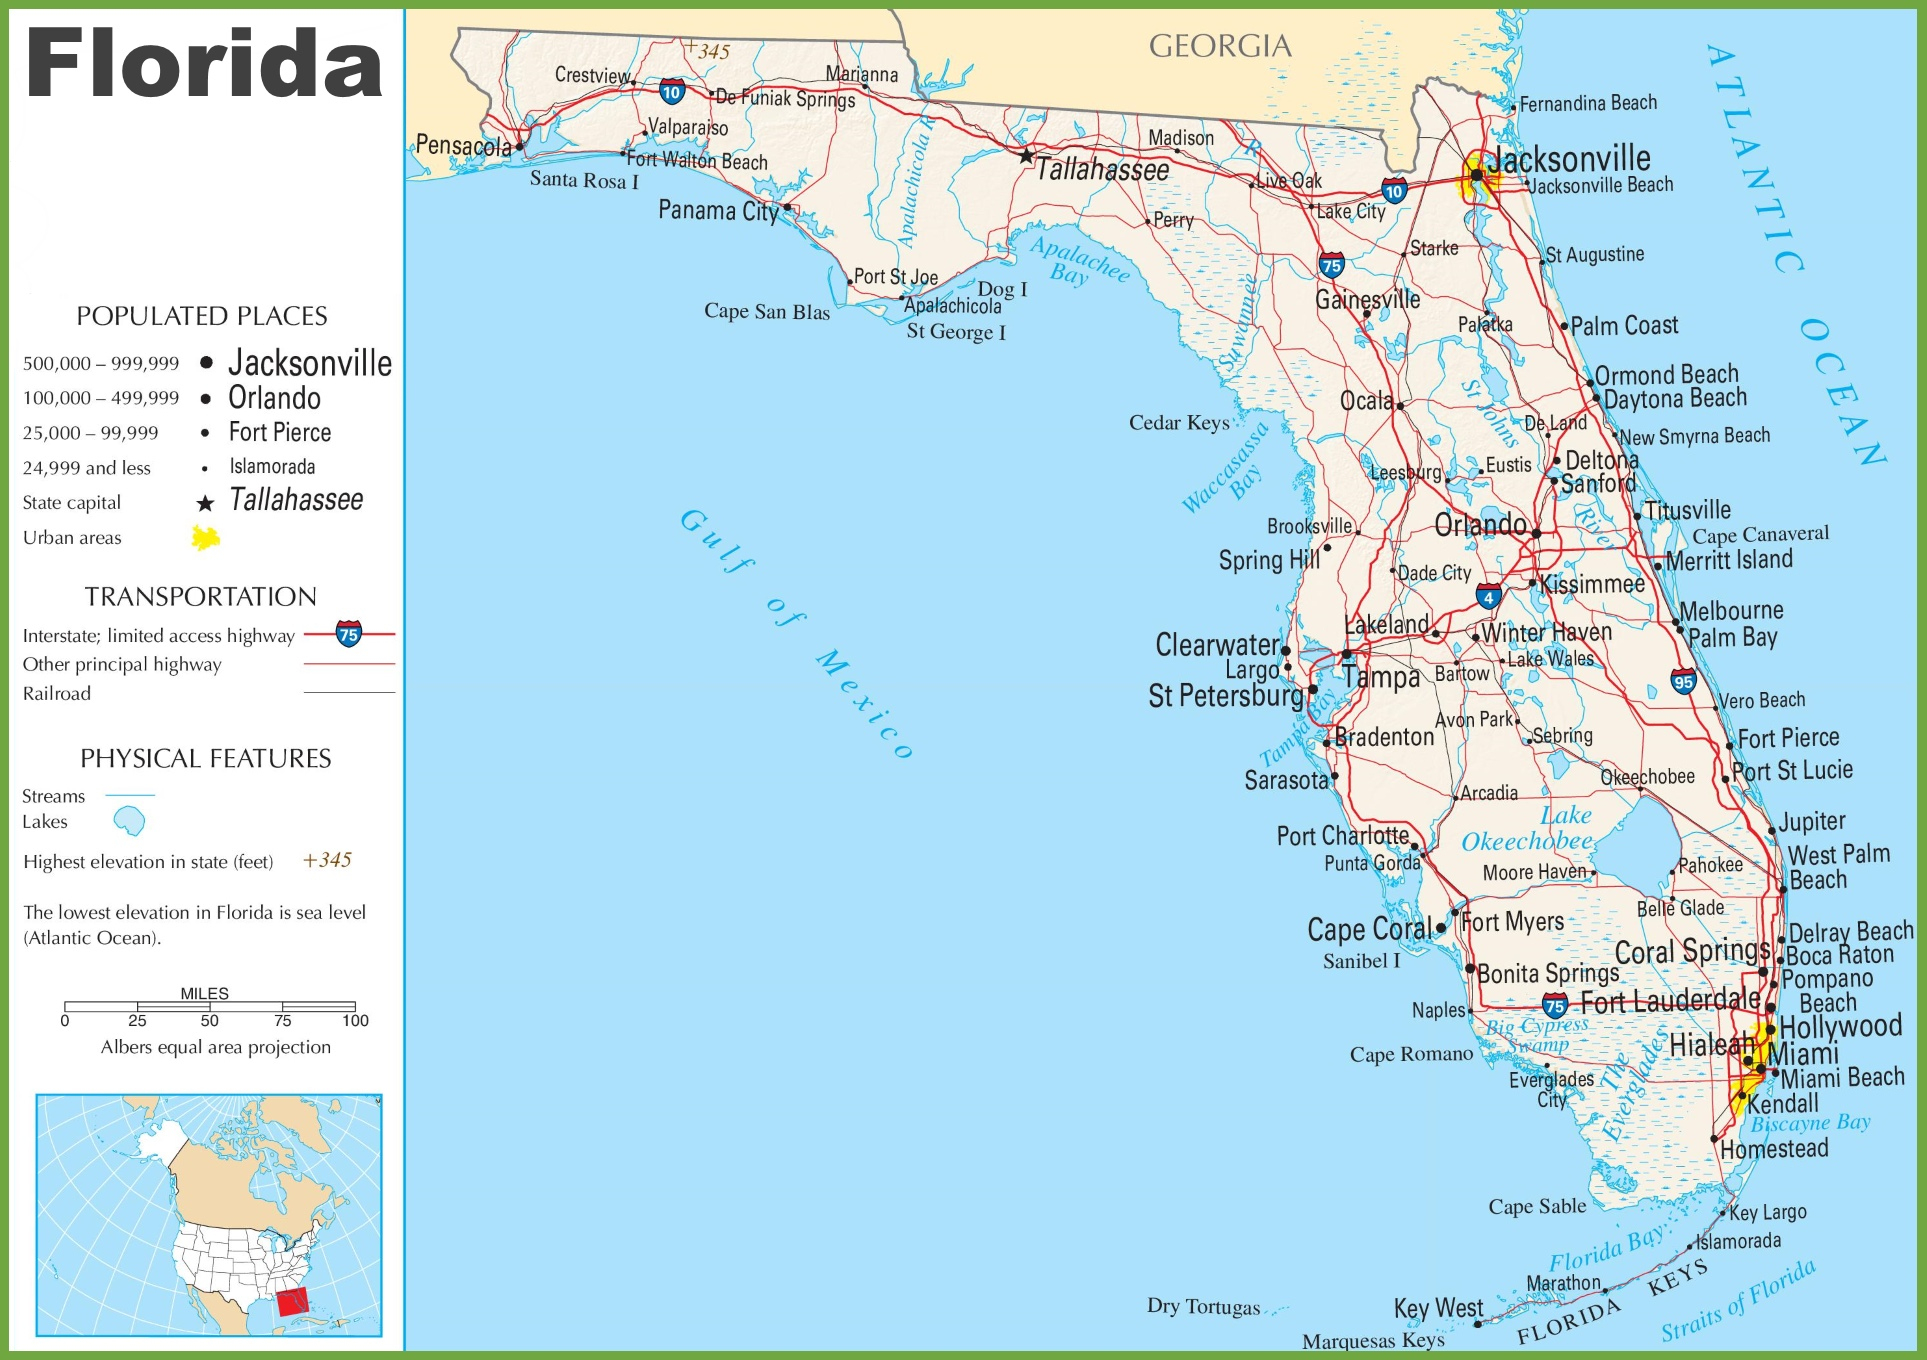 Florida State Map With Major Cities And Travel Information - New Smyrna Beach Florida Map